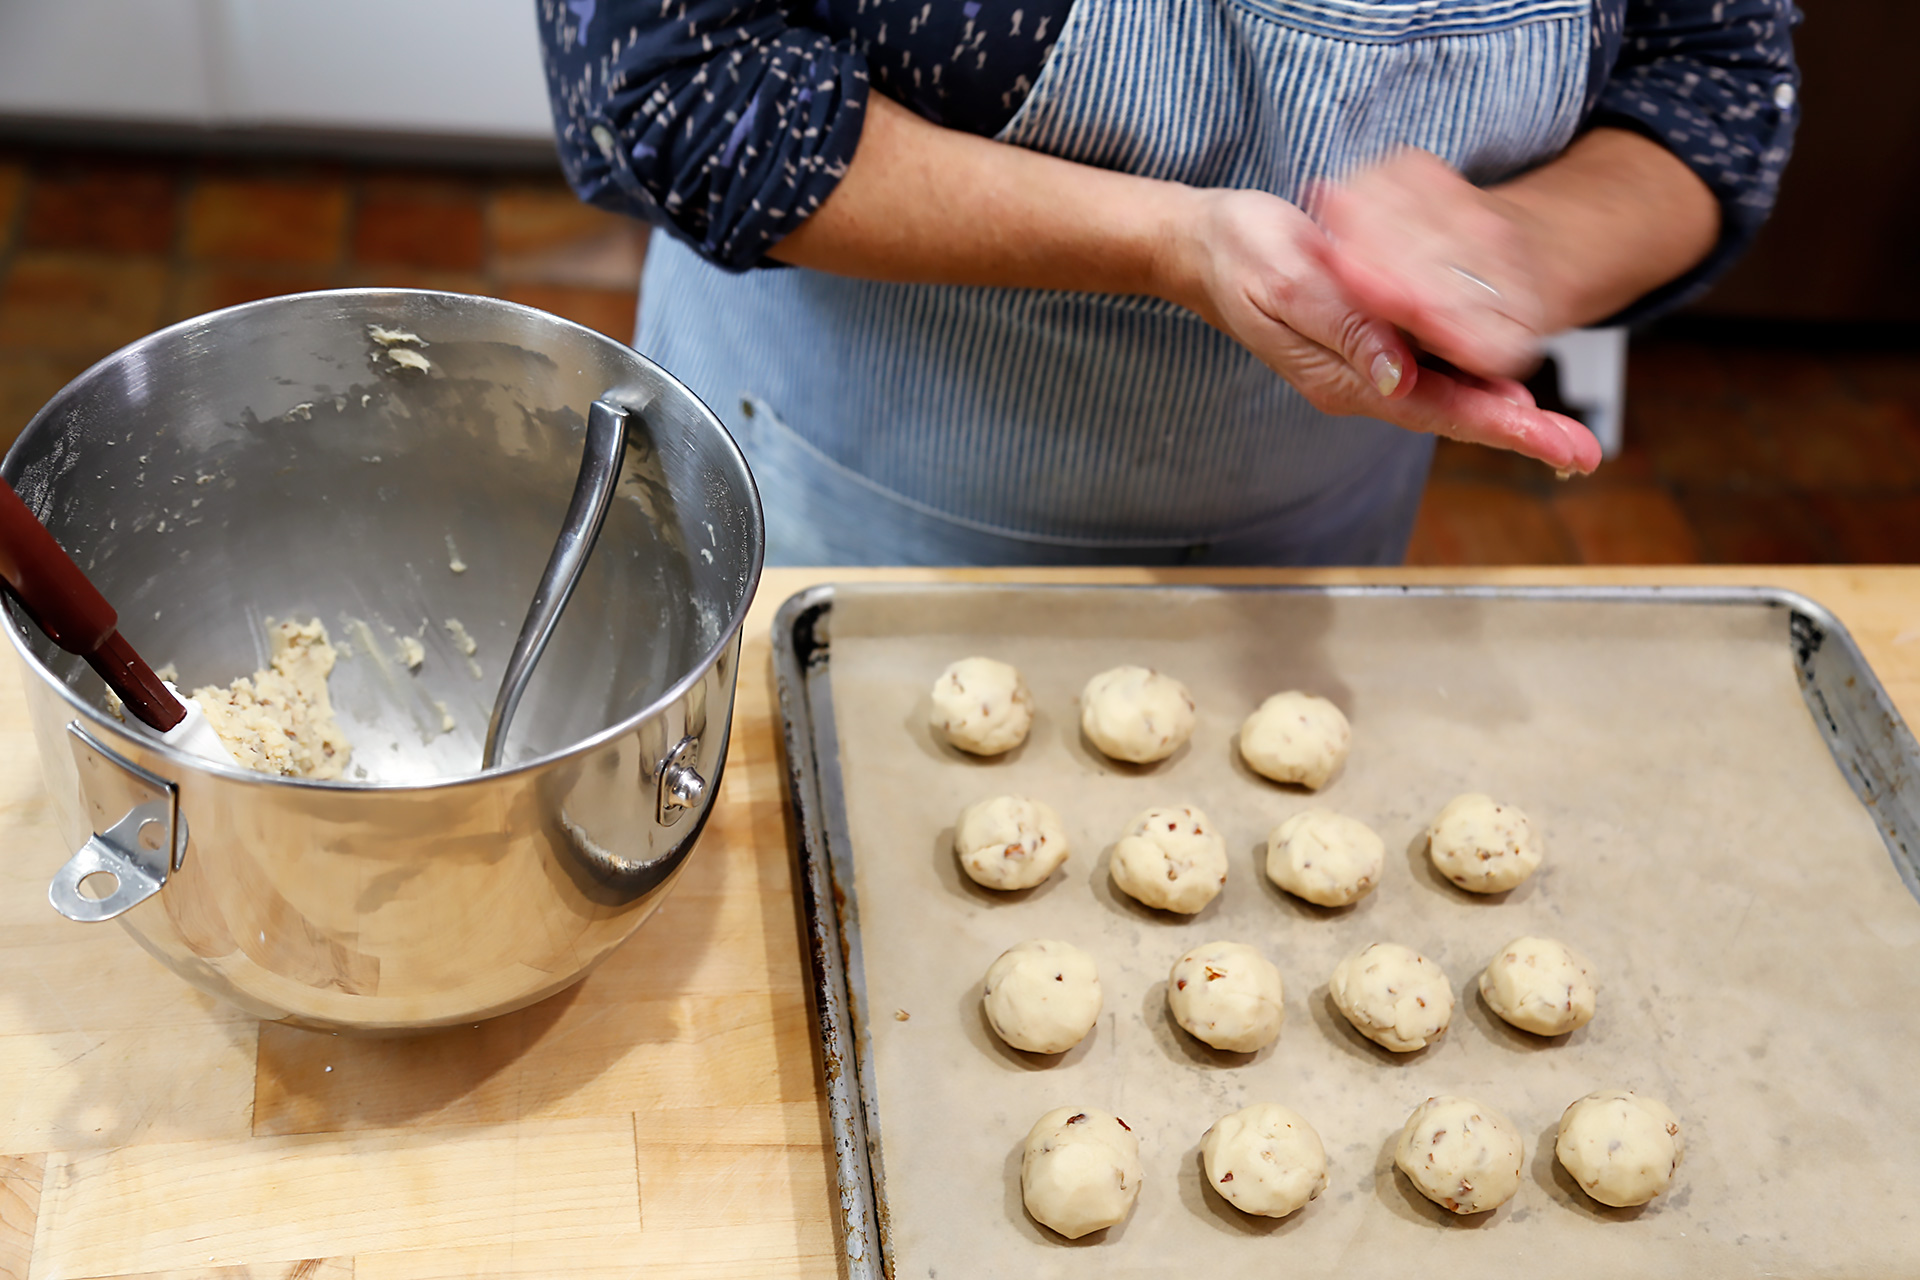 Scoop up tablespoonfuls of the dough and, using wet hands, roll into balls.